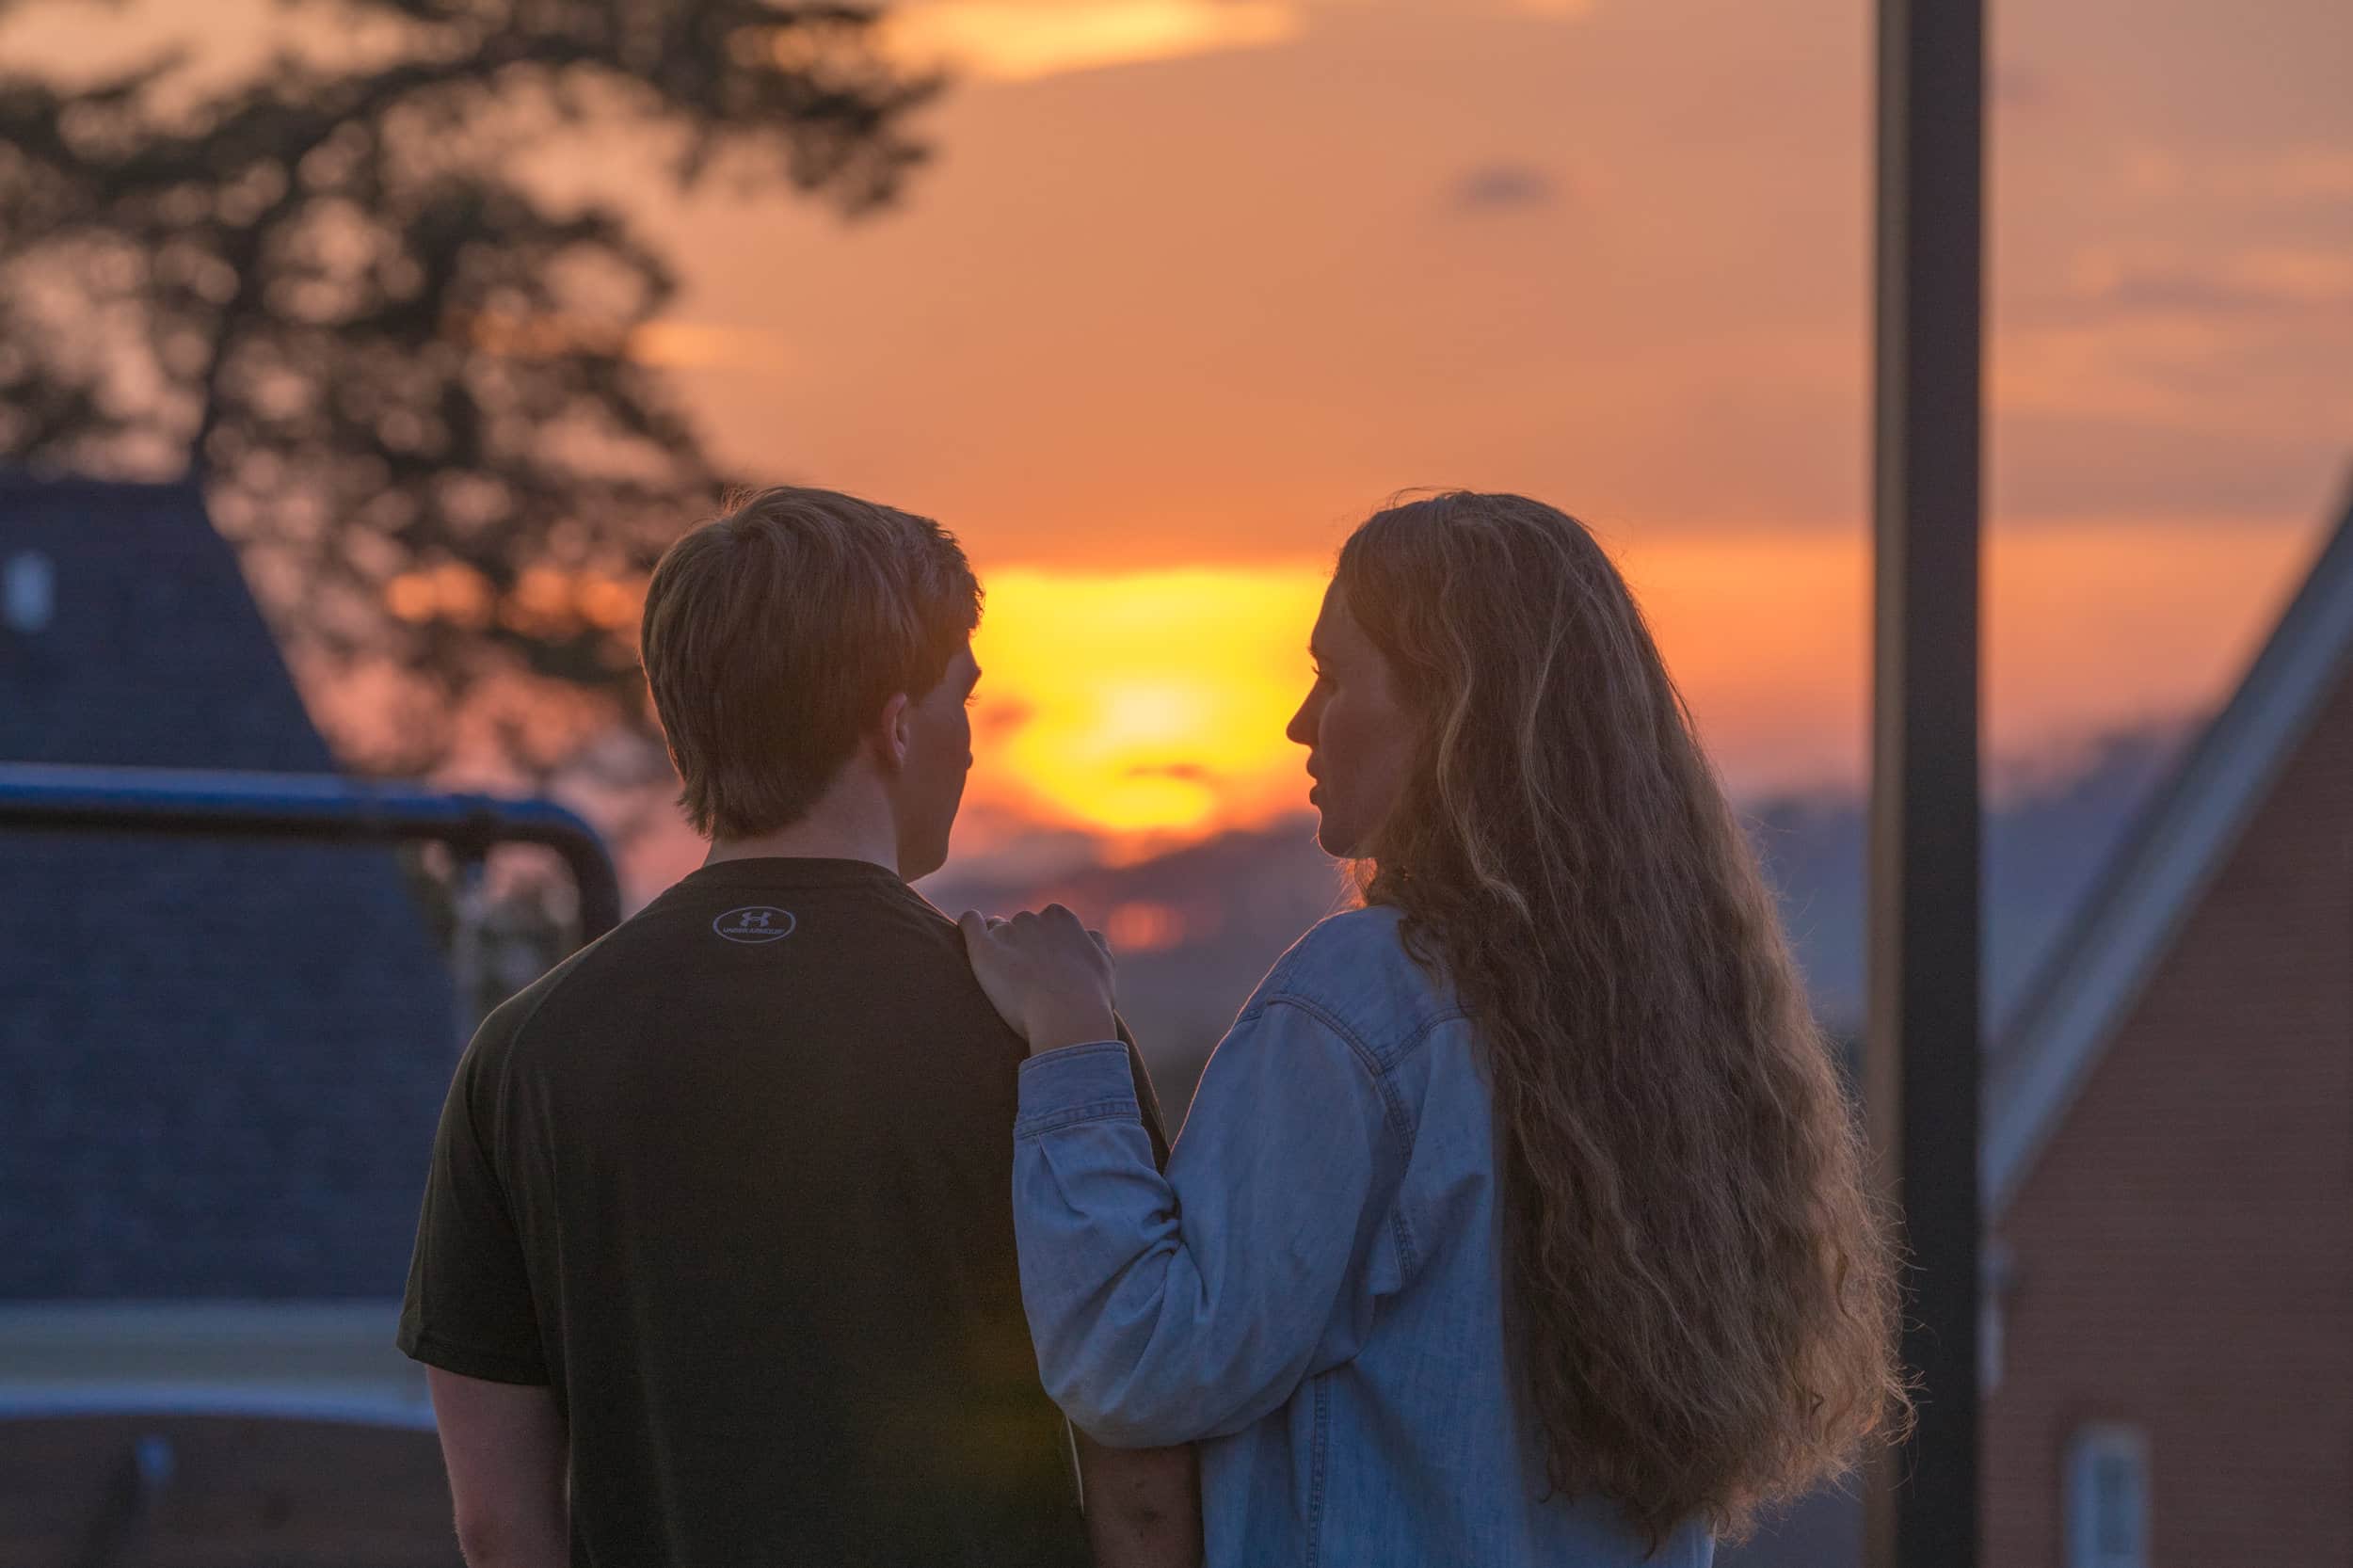 A couple takes in a peaceful moment as the sun sets behind the Blue Ridge mountains.